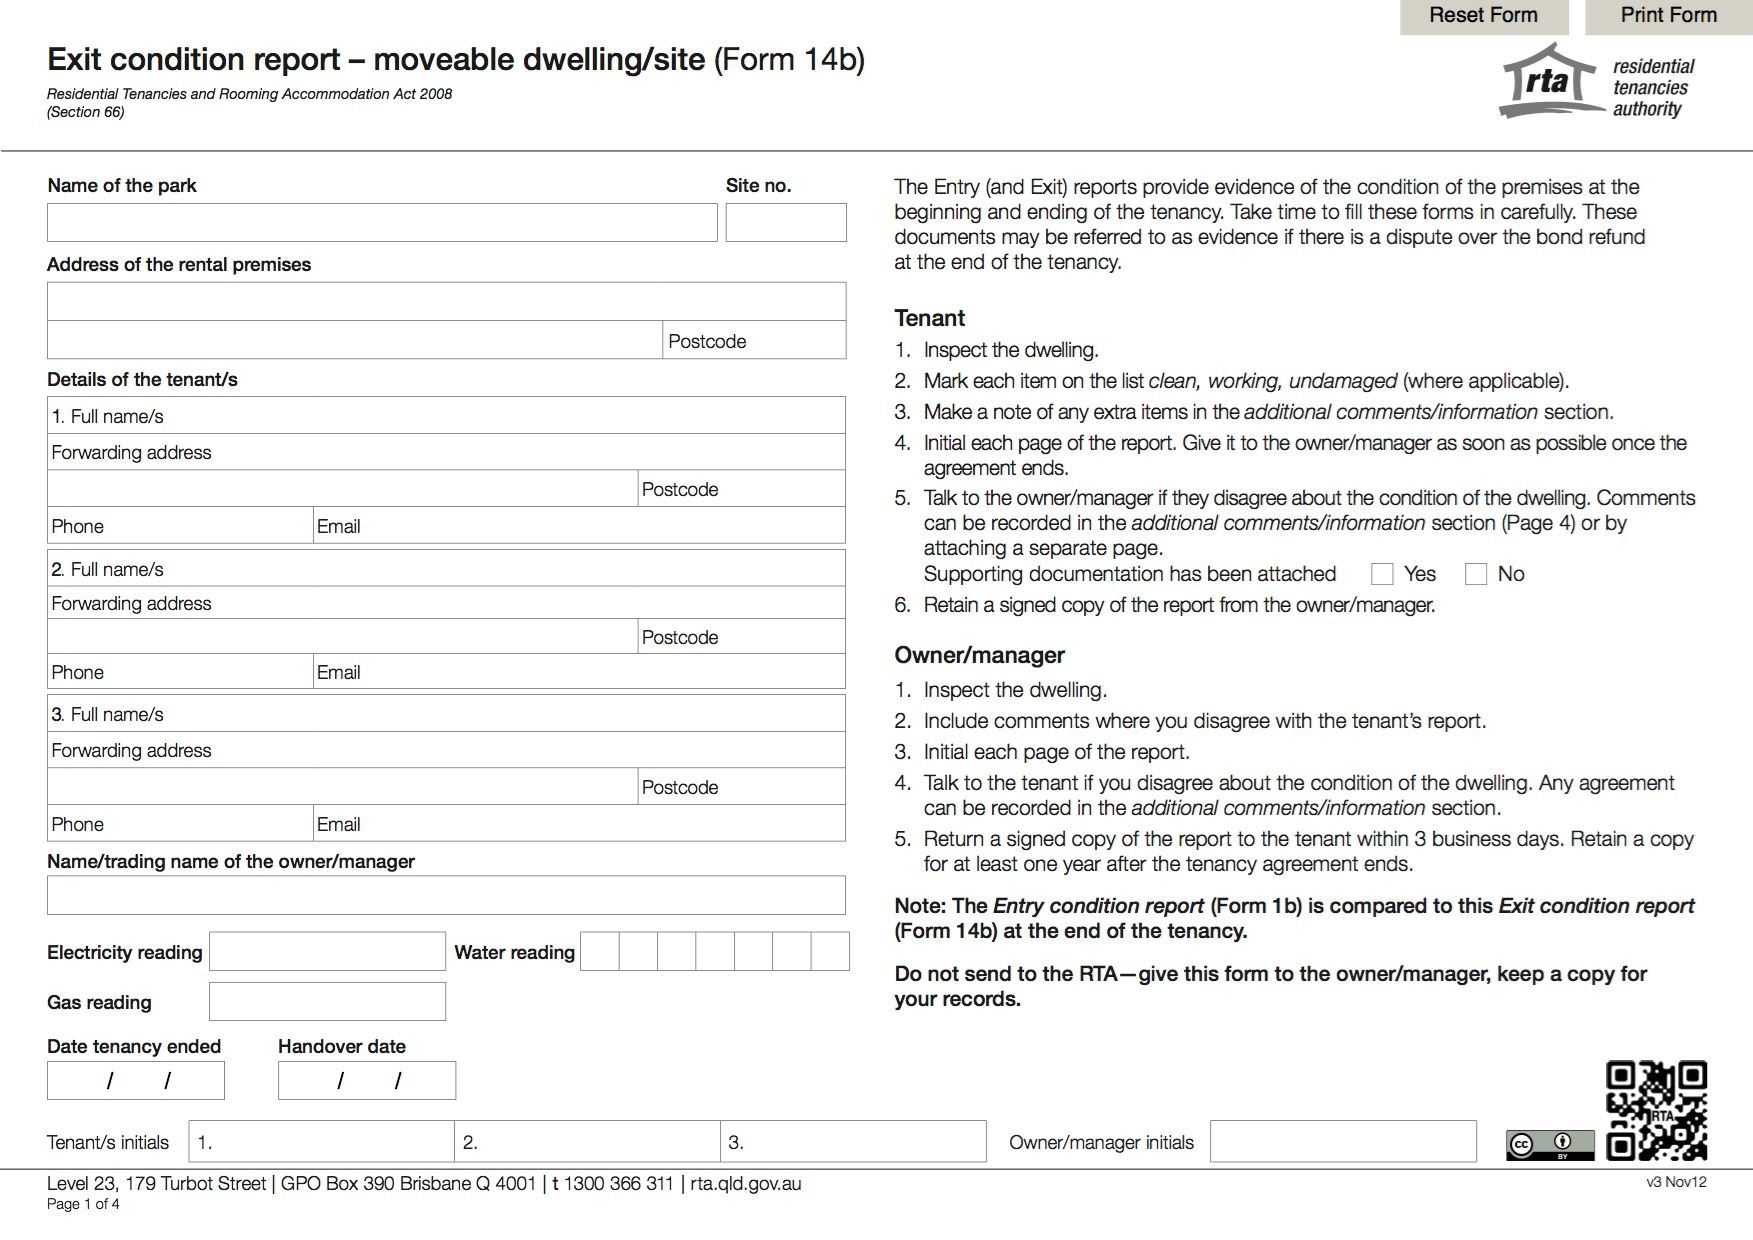 Incident Report Form Template Qld ] – 2008 09 Annual Report For Incident Report Form Template Qld